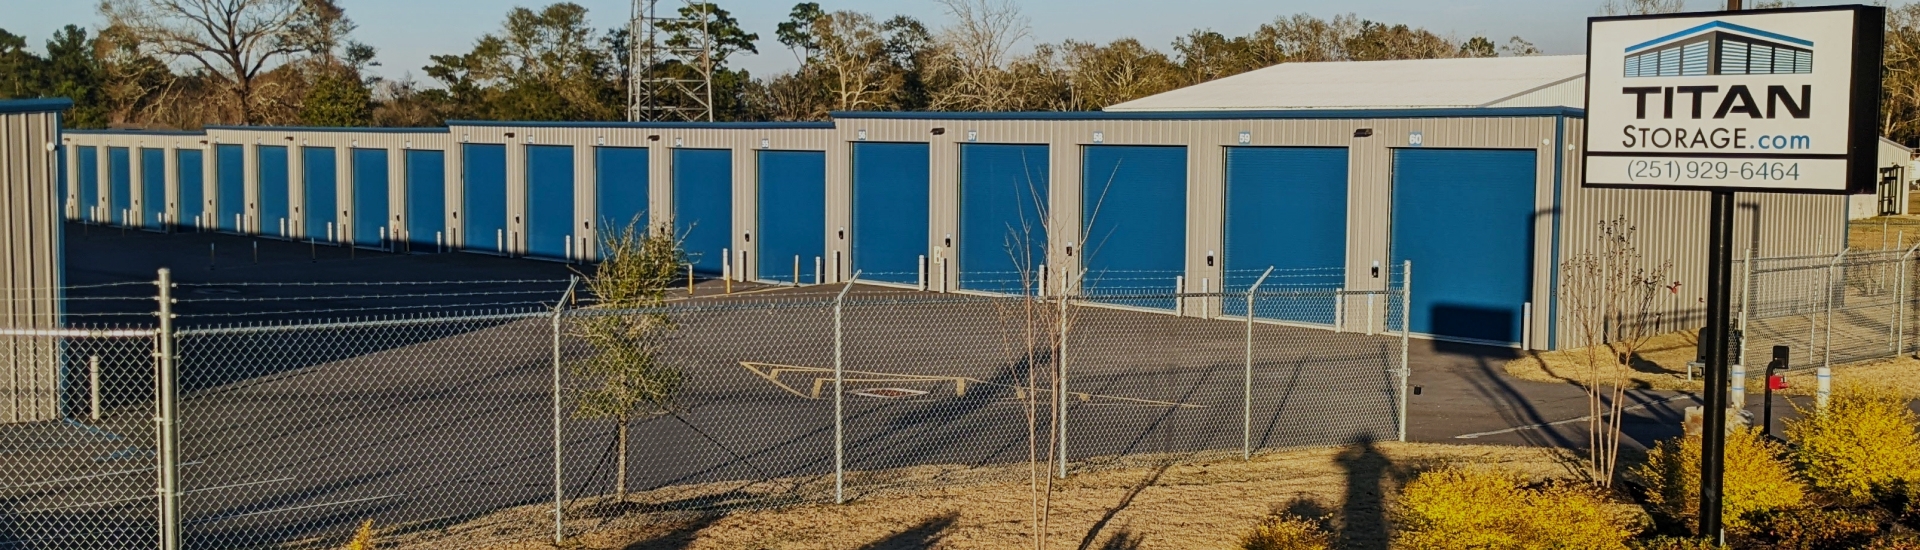 Enter Titan Storage Spanish Fort through the wide gate and down the extra wide driveway to your unit.